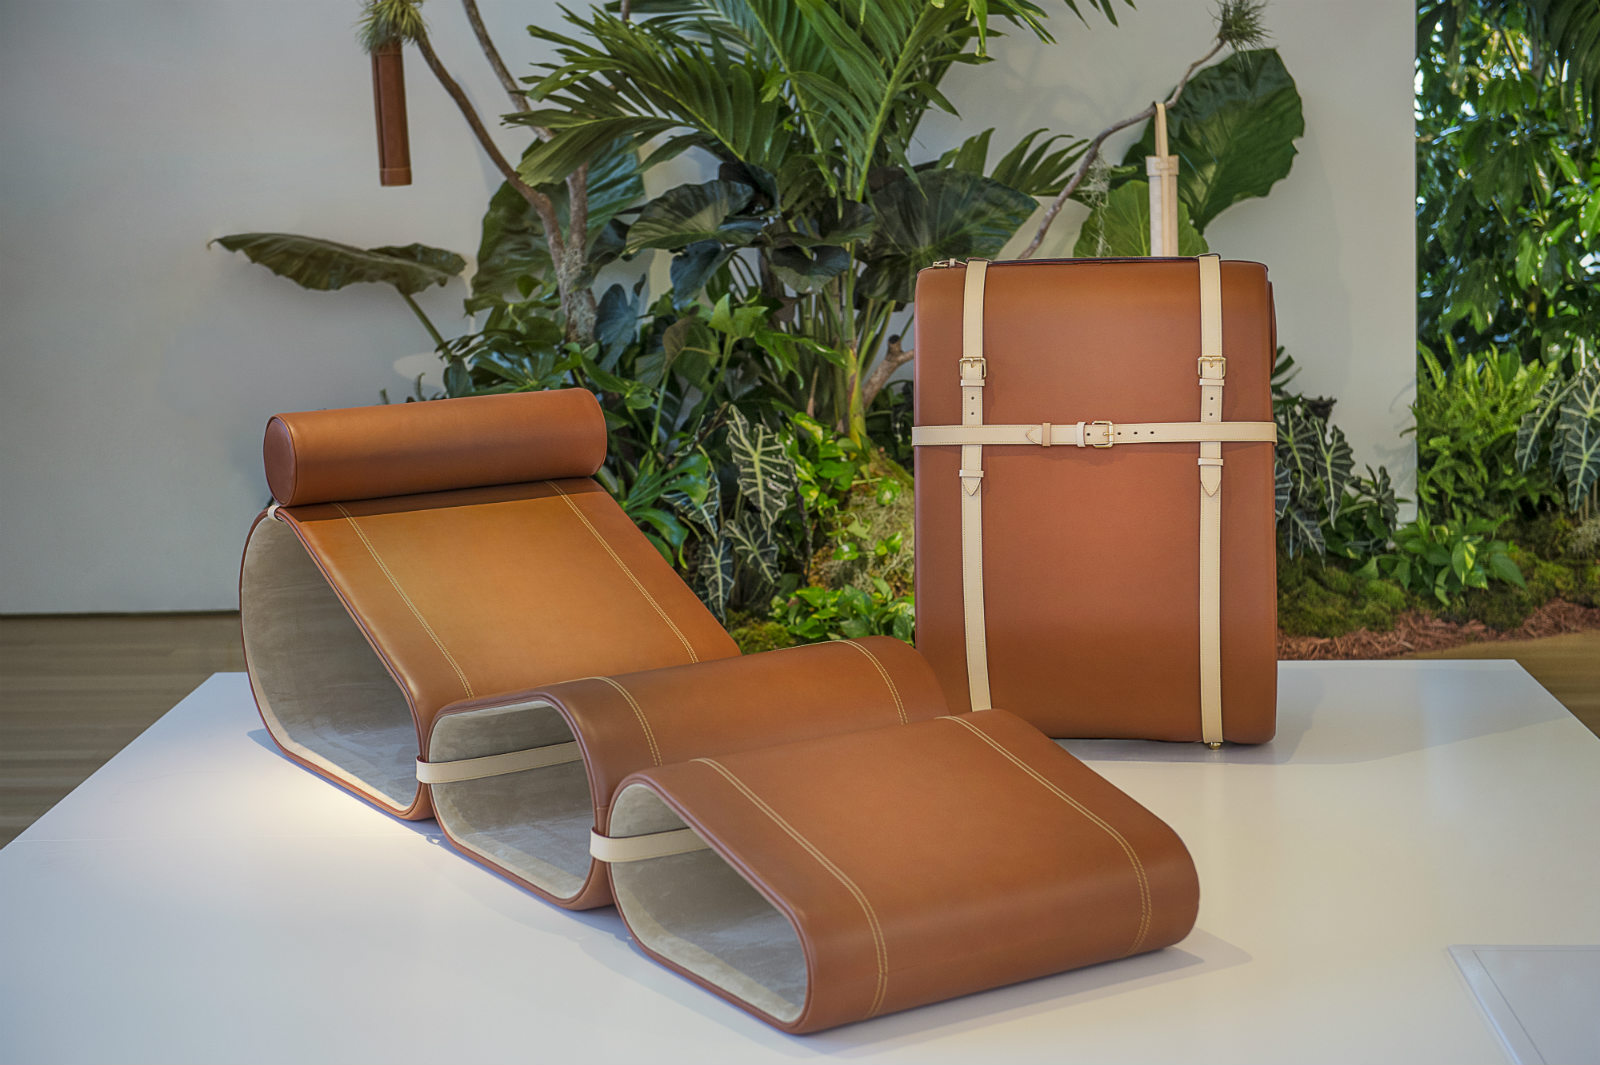 Louis Vuitton reveal ten new additions to their Objets Nomades